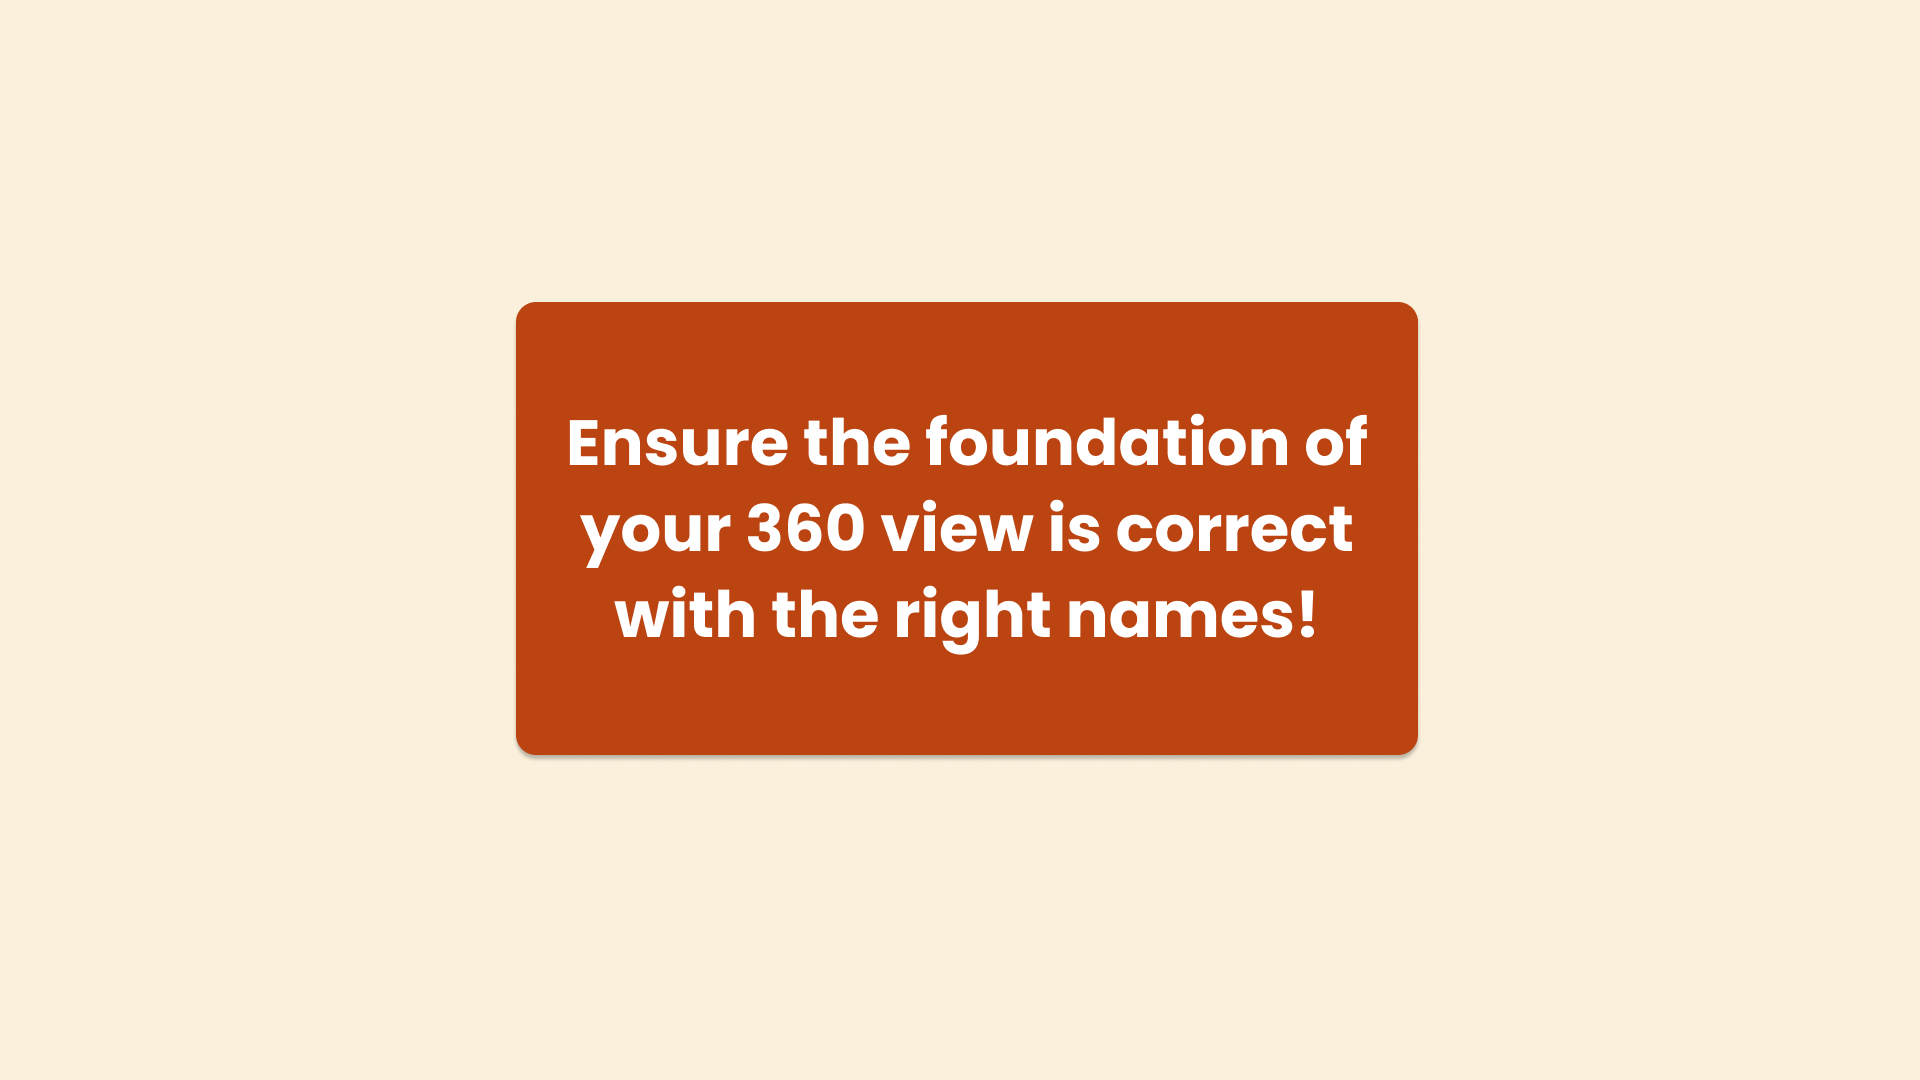 Ensure you have the correct 360 view of your customers starting with their names!